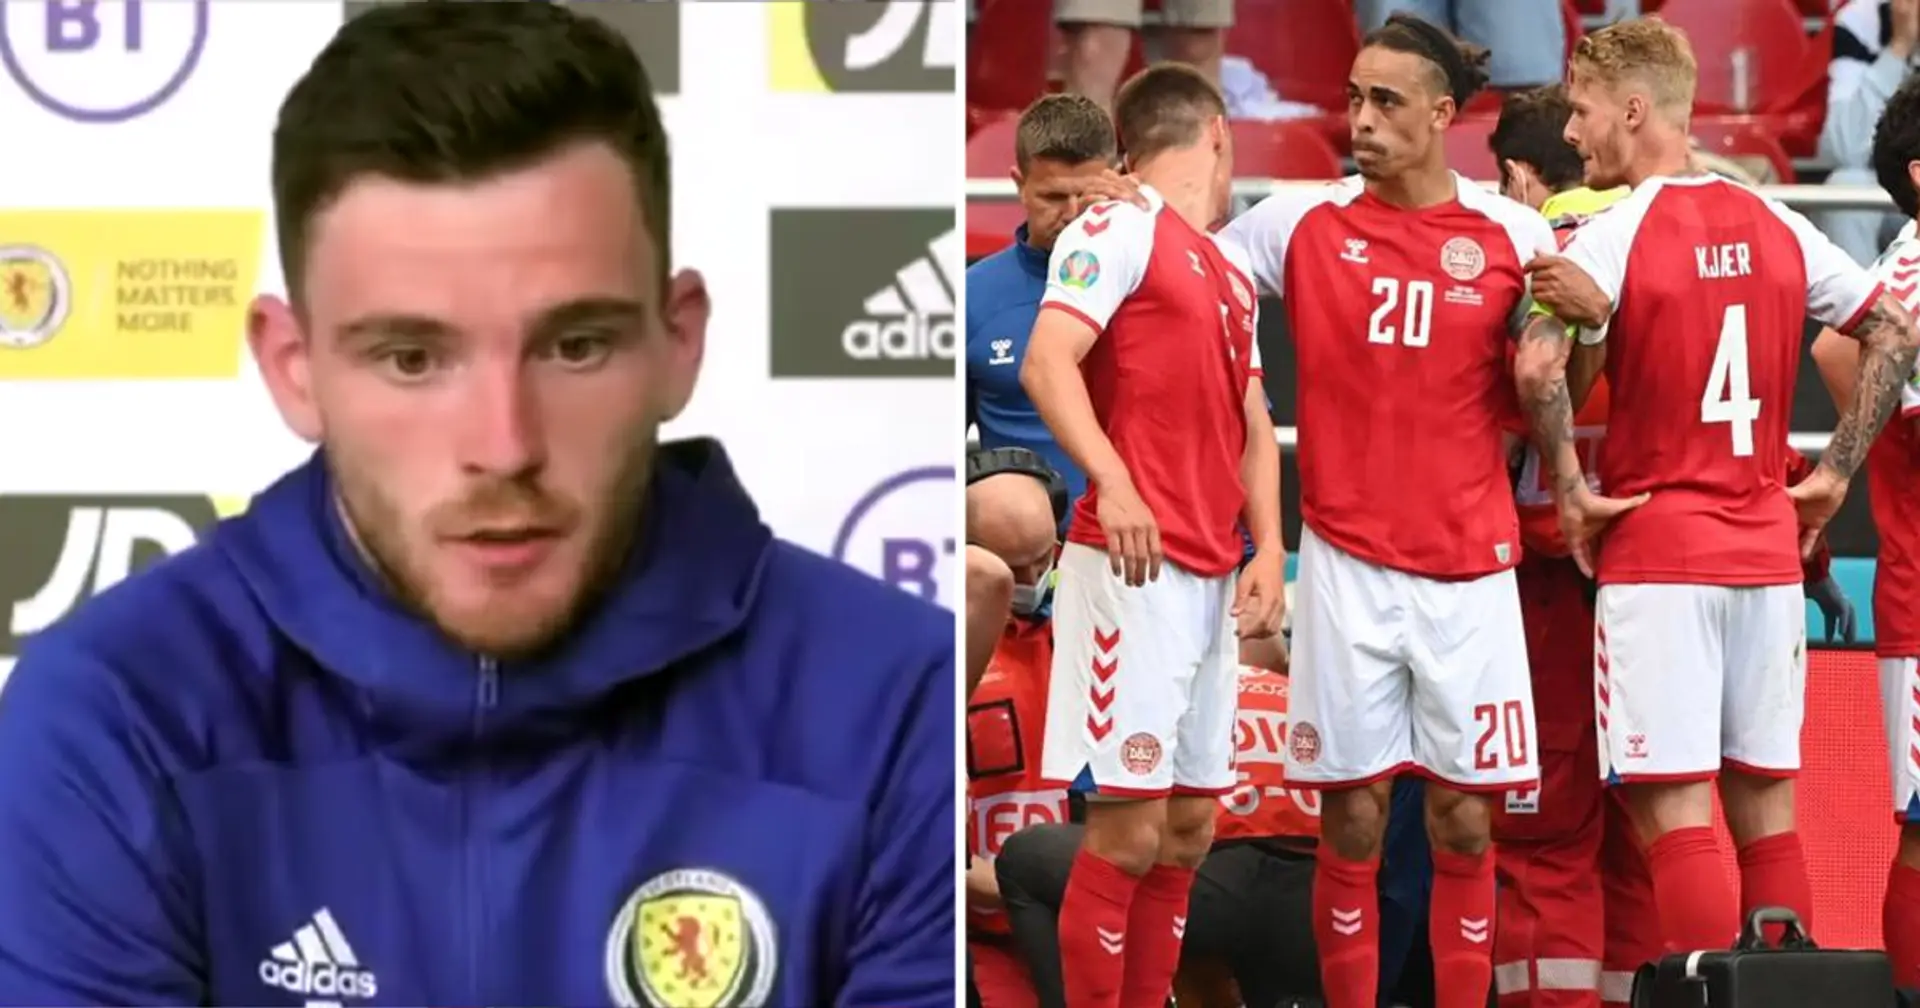 'Whatever else happens, they will be the heroes': Andy Robertson applauds Denmark players for protecting Christian Eriksen